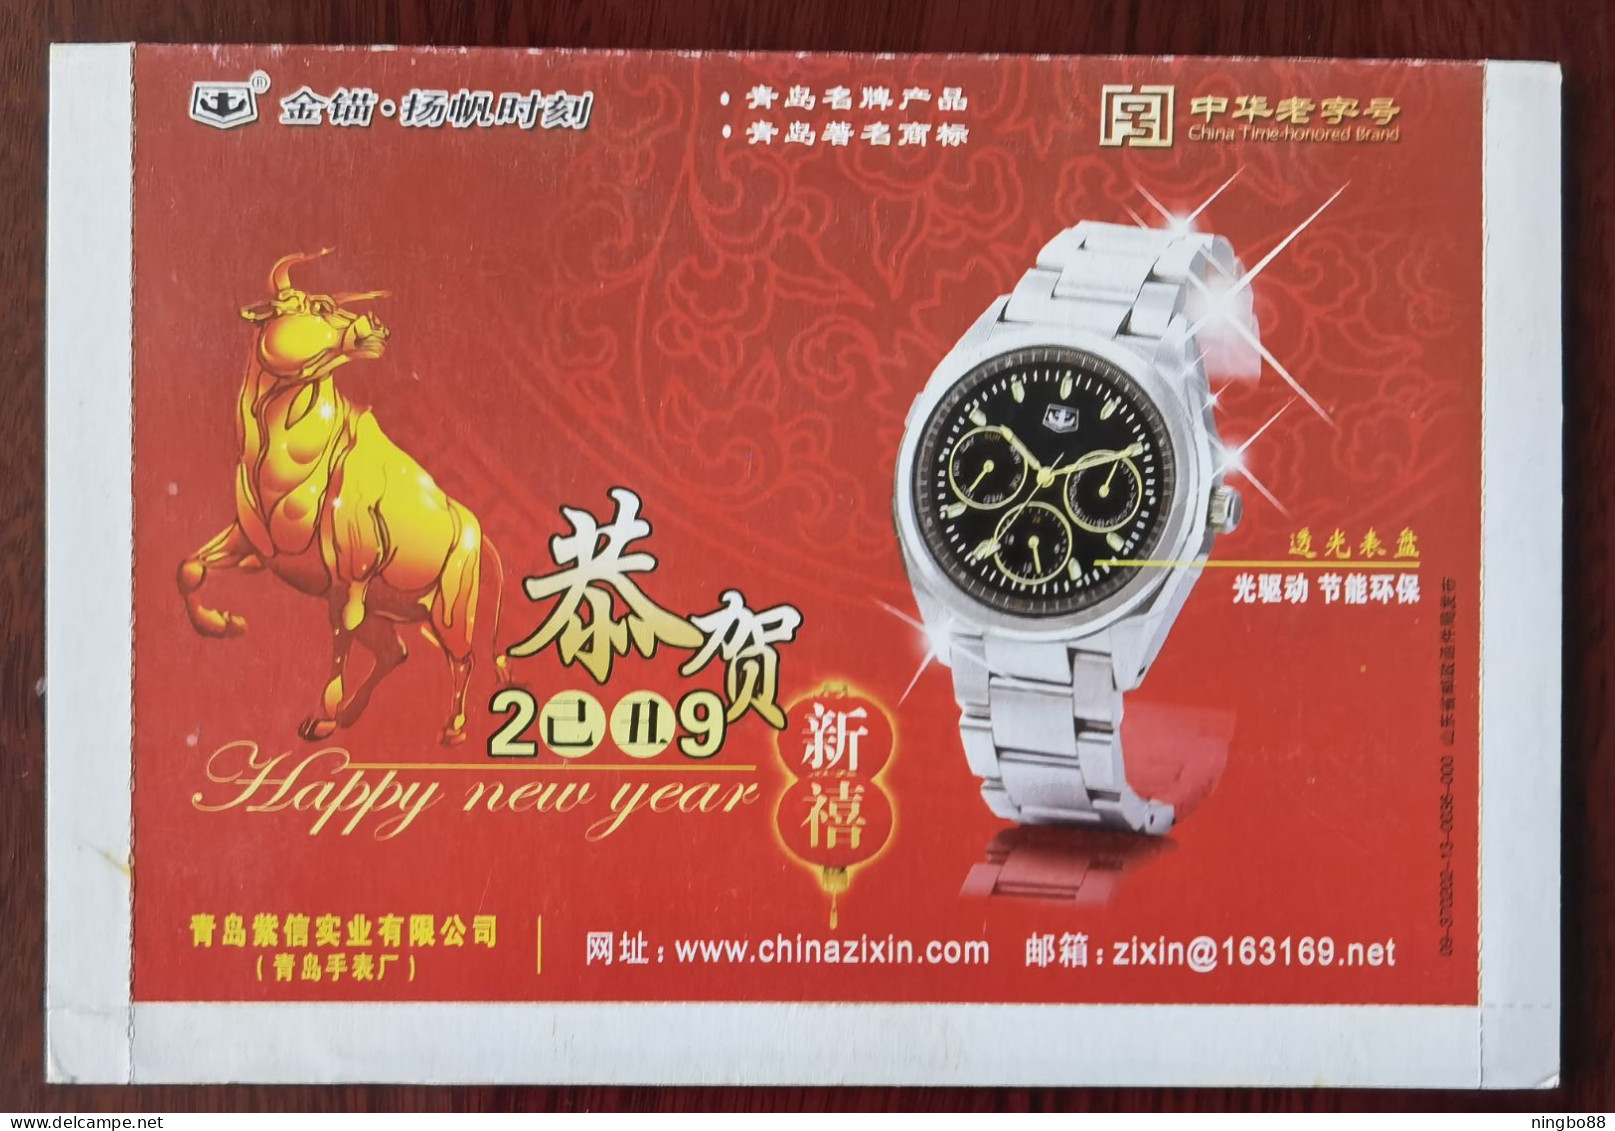 China Time-honored Brand Golden Anchor Photokinetic Energy Watch,China 2009 Qingdao Watch Factory Advertising PSL - Clocks